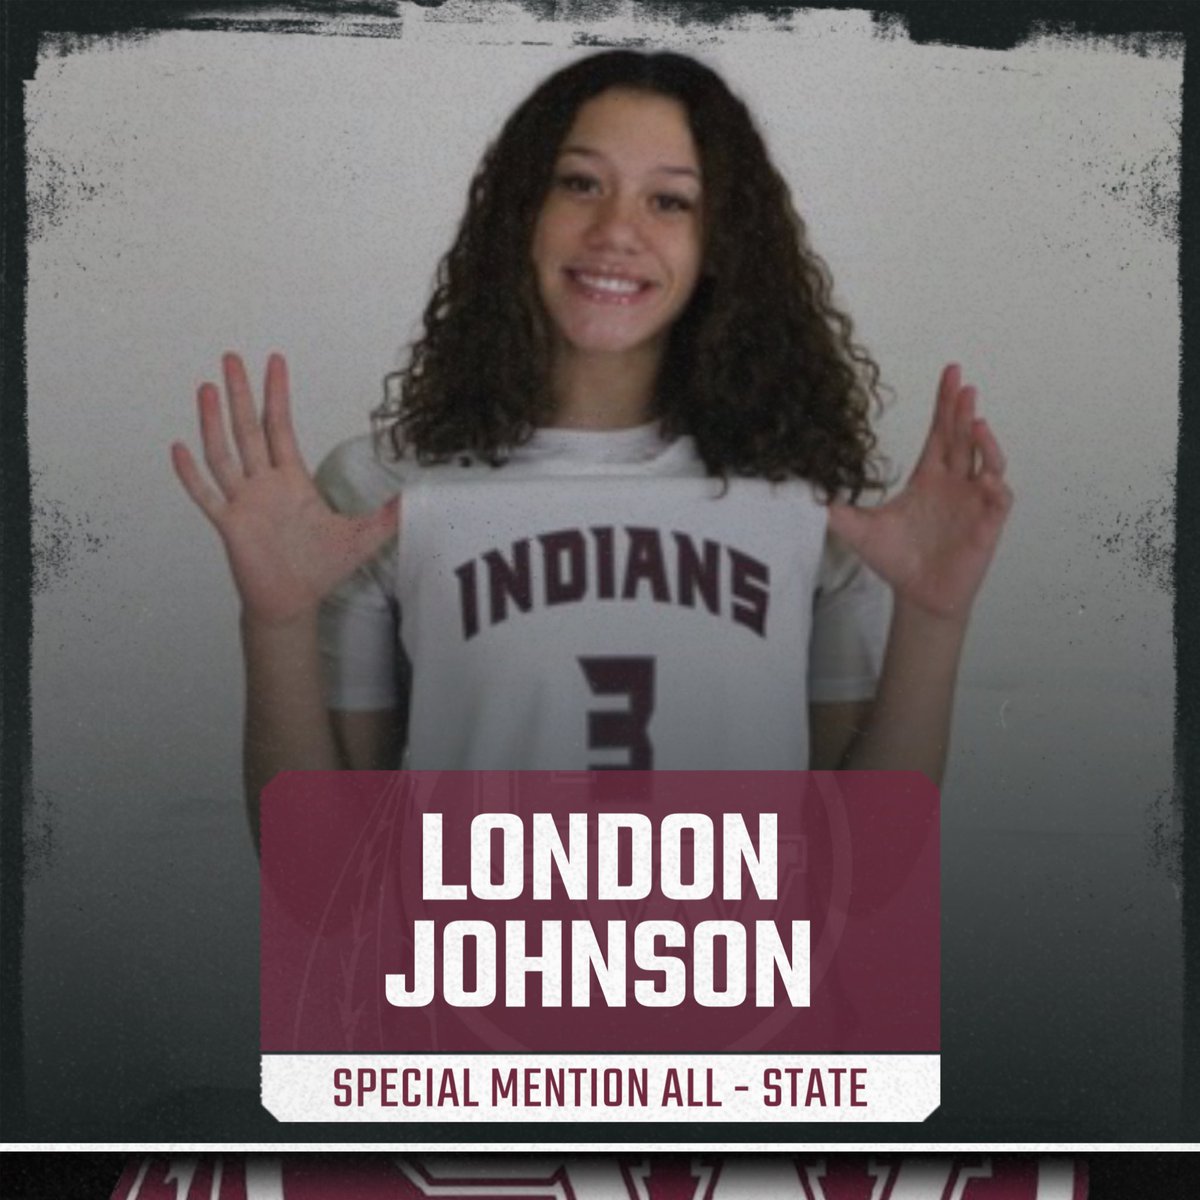 Congratulations to @LondonJohnson26 on being named Special Mention All-State